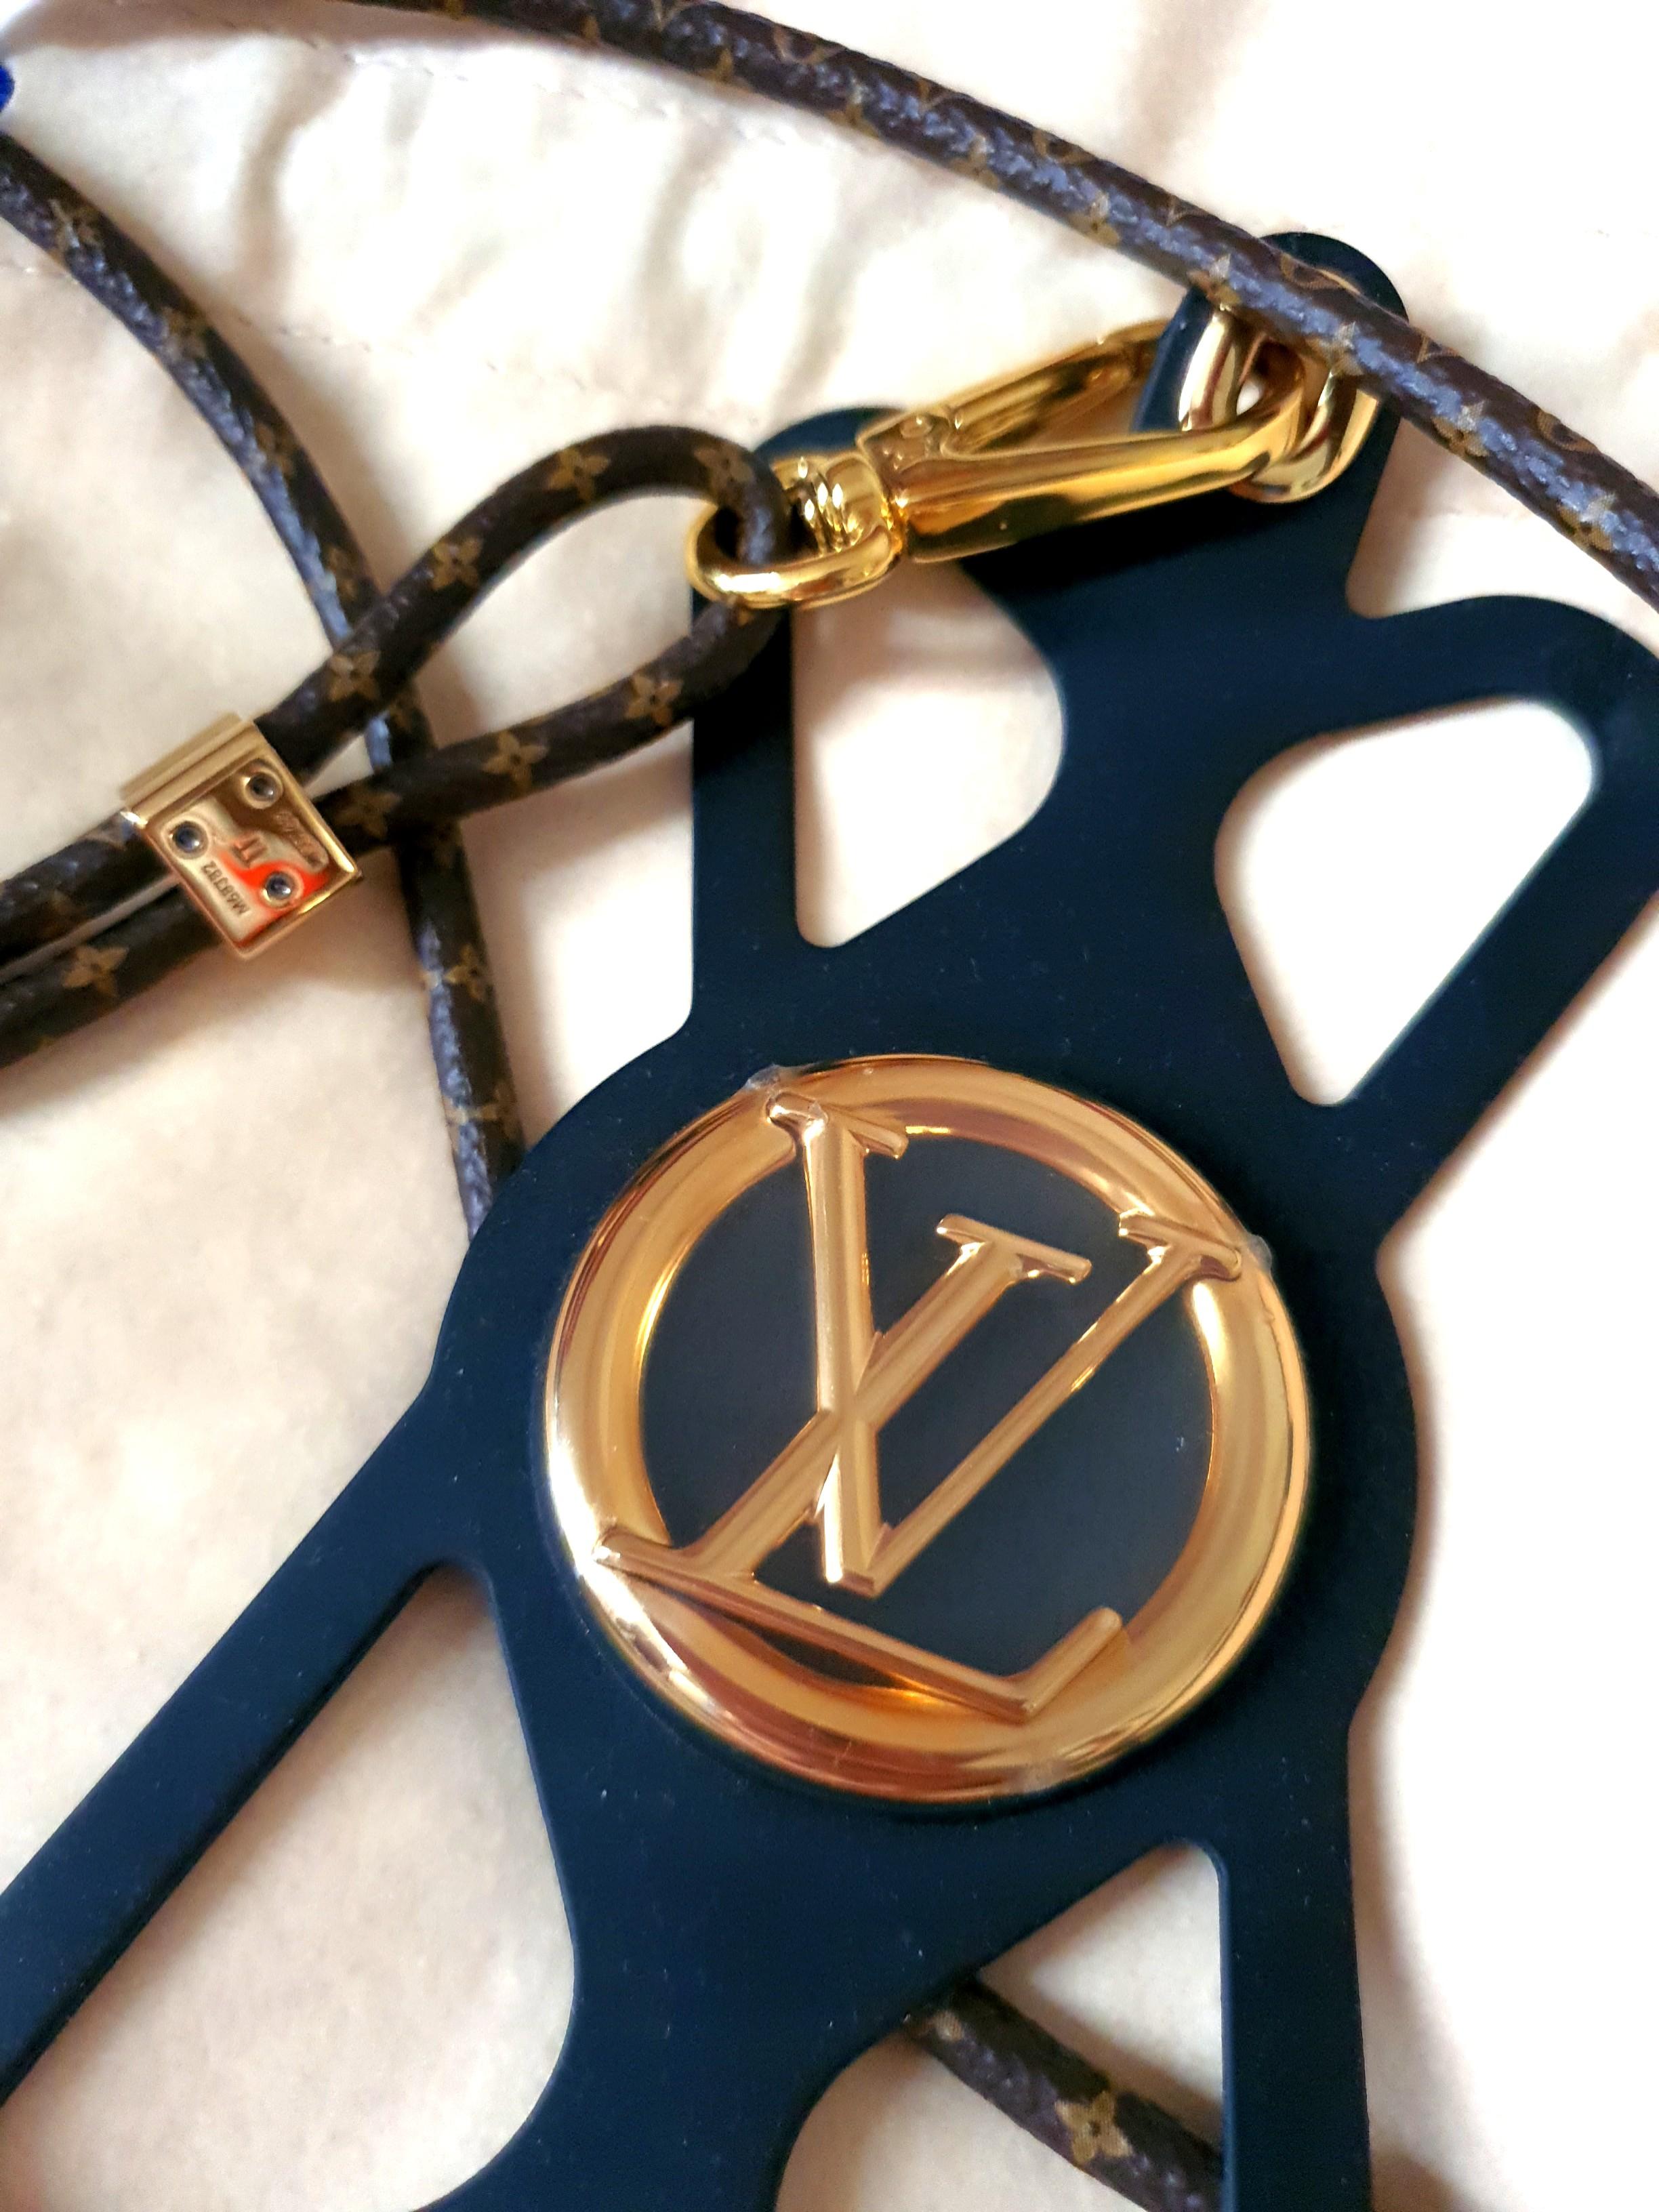 LOUIS VUITTON LOUISE PHONE HOLDER UPDATE - WTF!? 